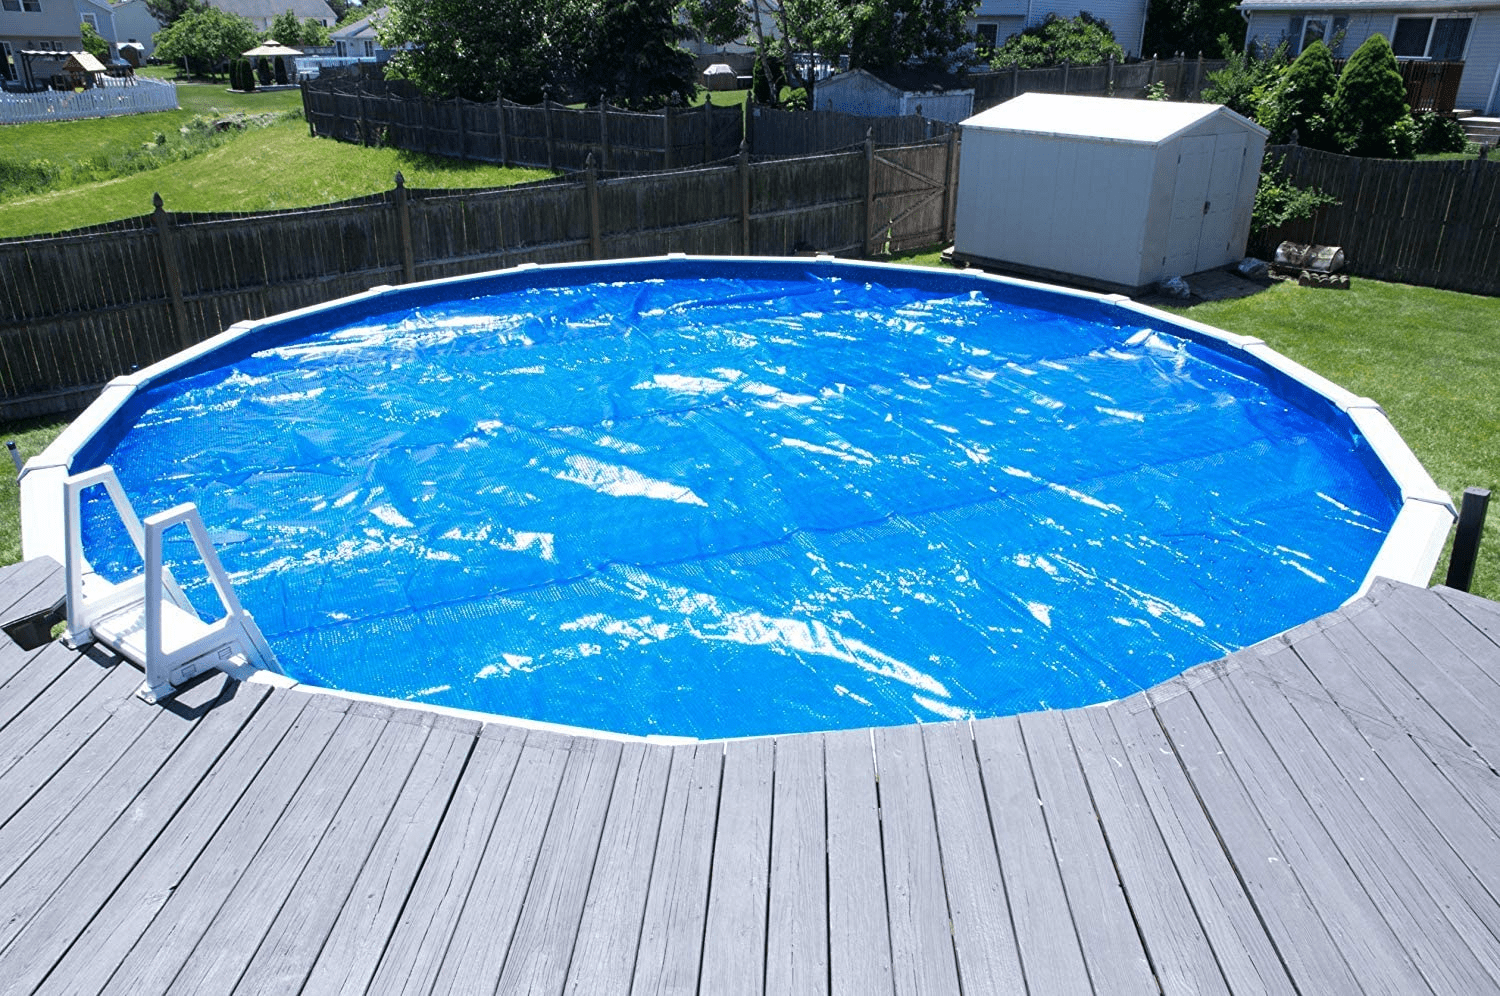 Summer Winter Swimming Bubble Heating Blankets JLXJ Rectangular Solar Pool Cover with Grommet for Above Ground Pools Size : 1m x 2m 3ft×6ft 400µm Thick